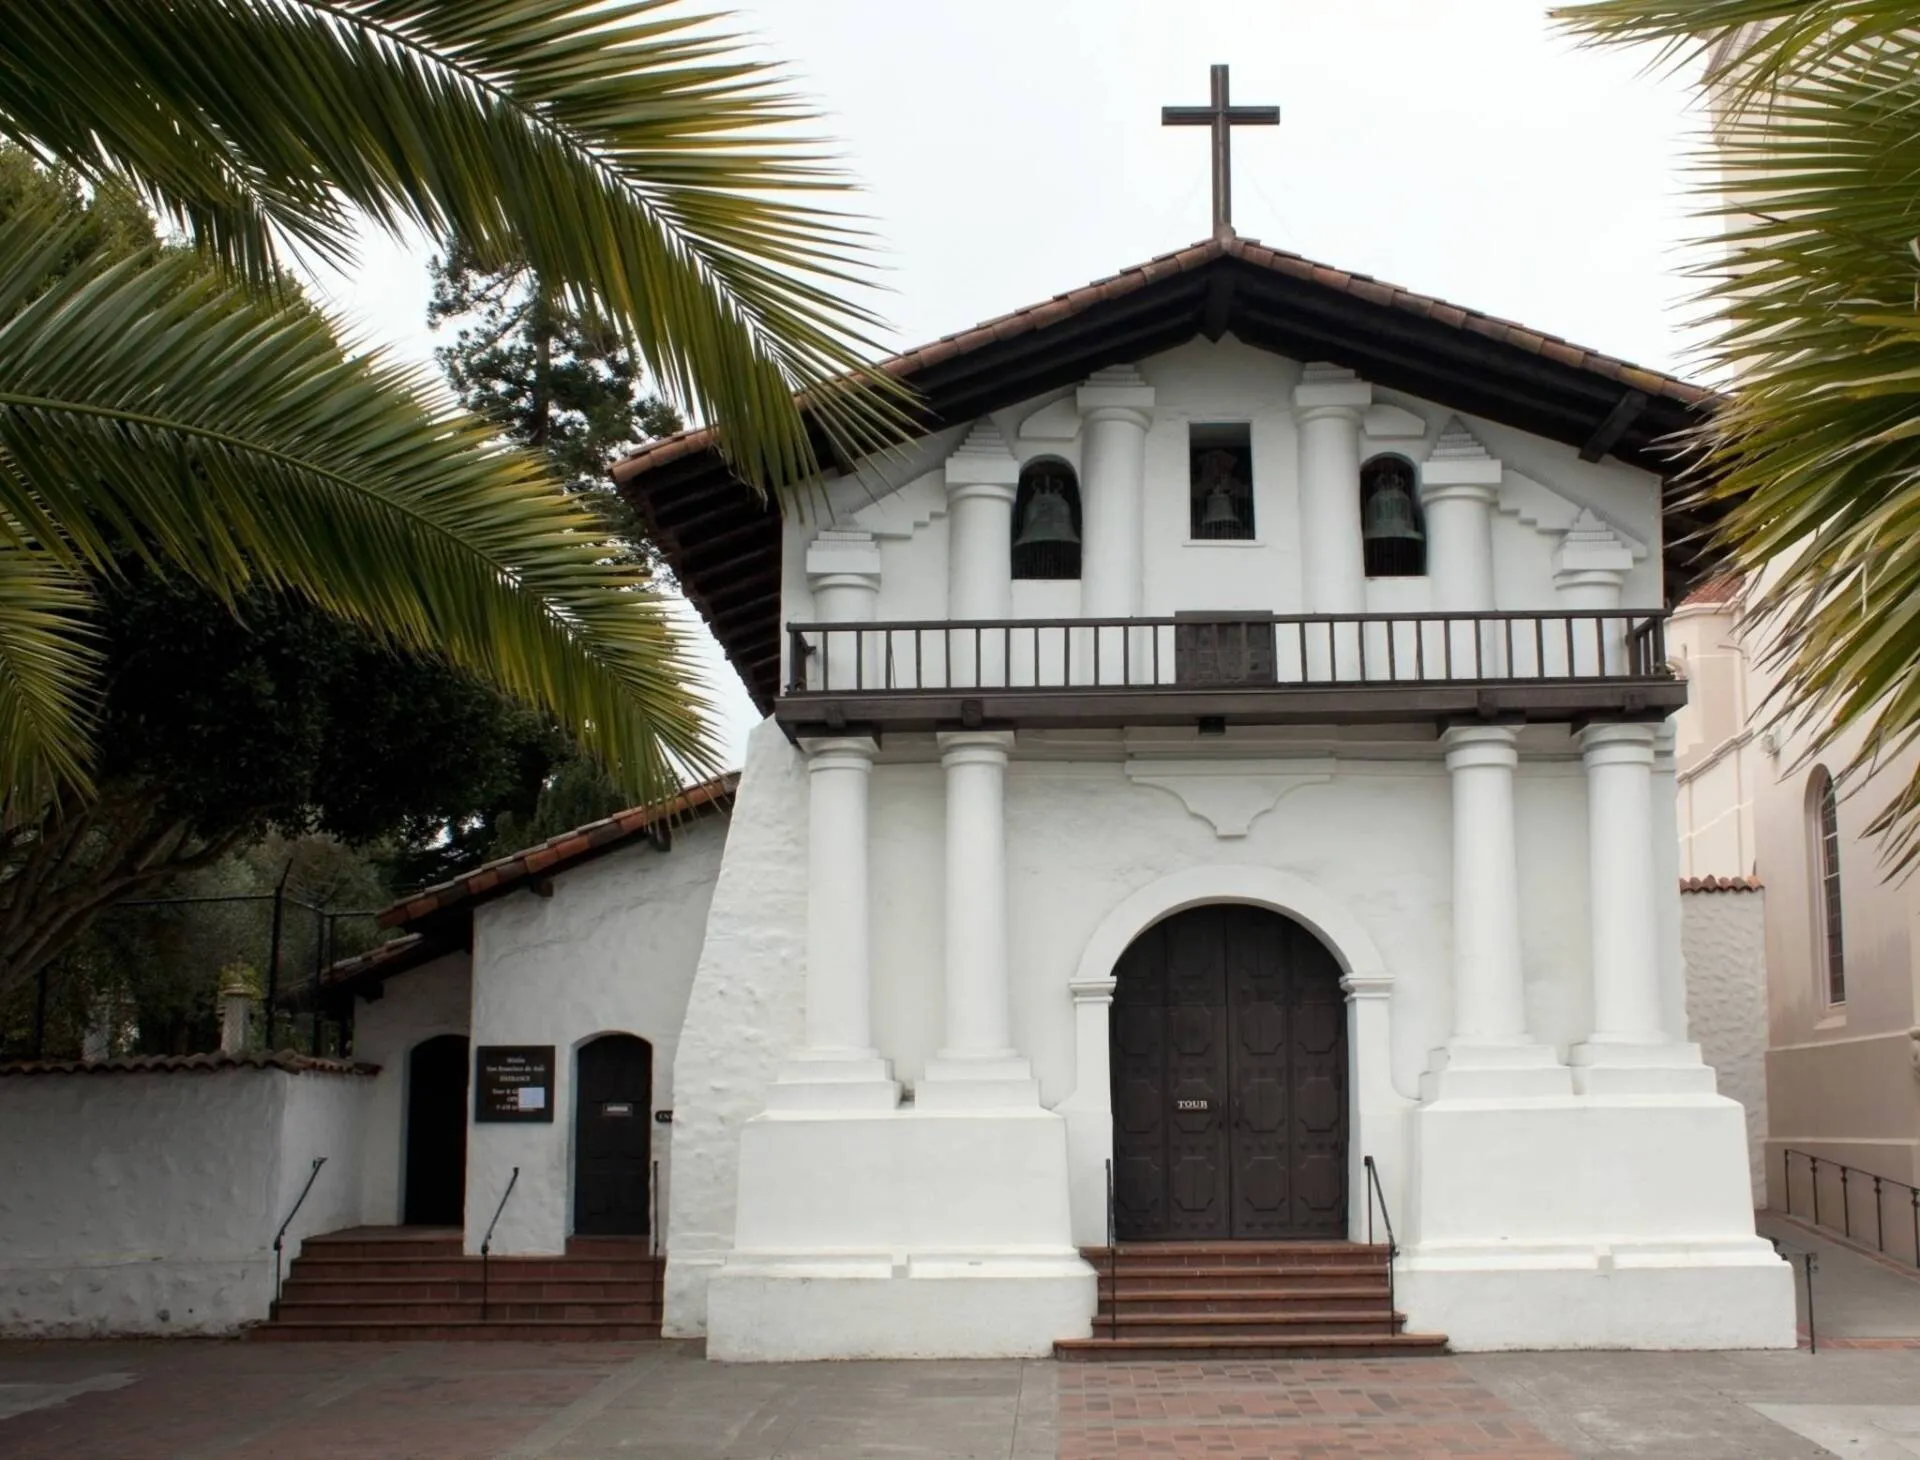 Exterior View of Mission Dolores, the Oldest Building in San Francisco